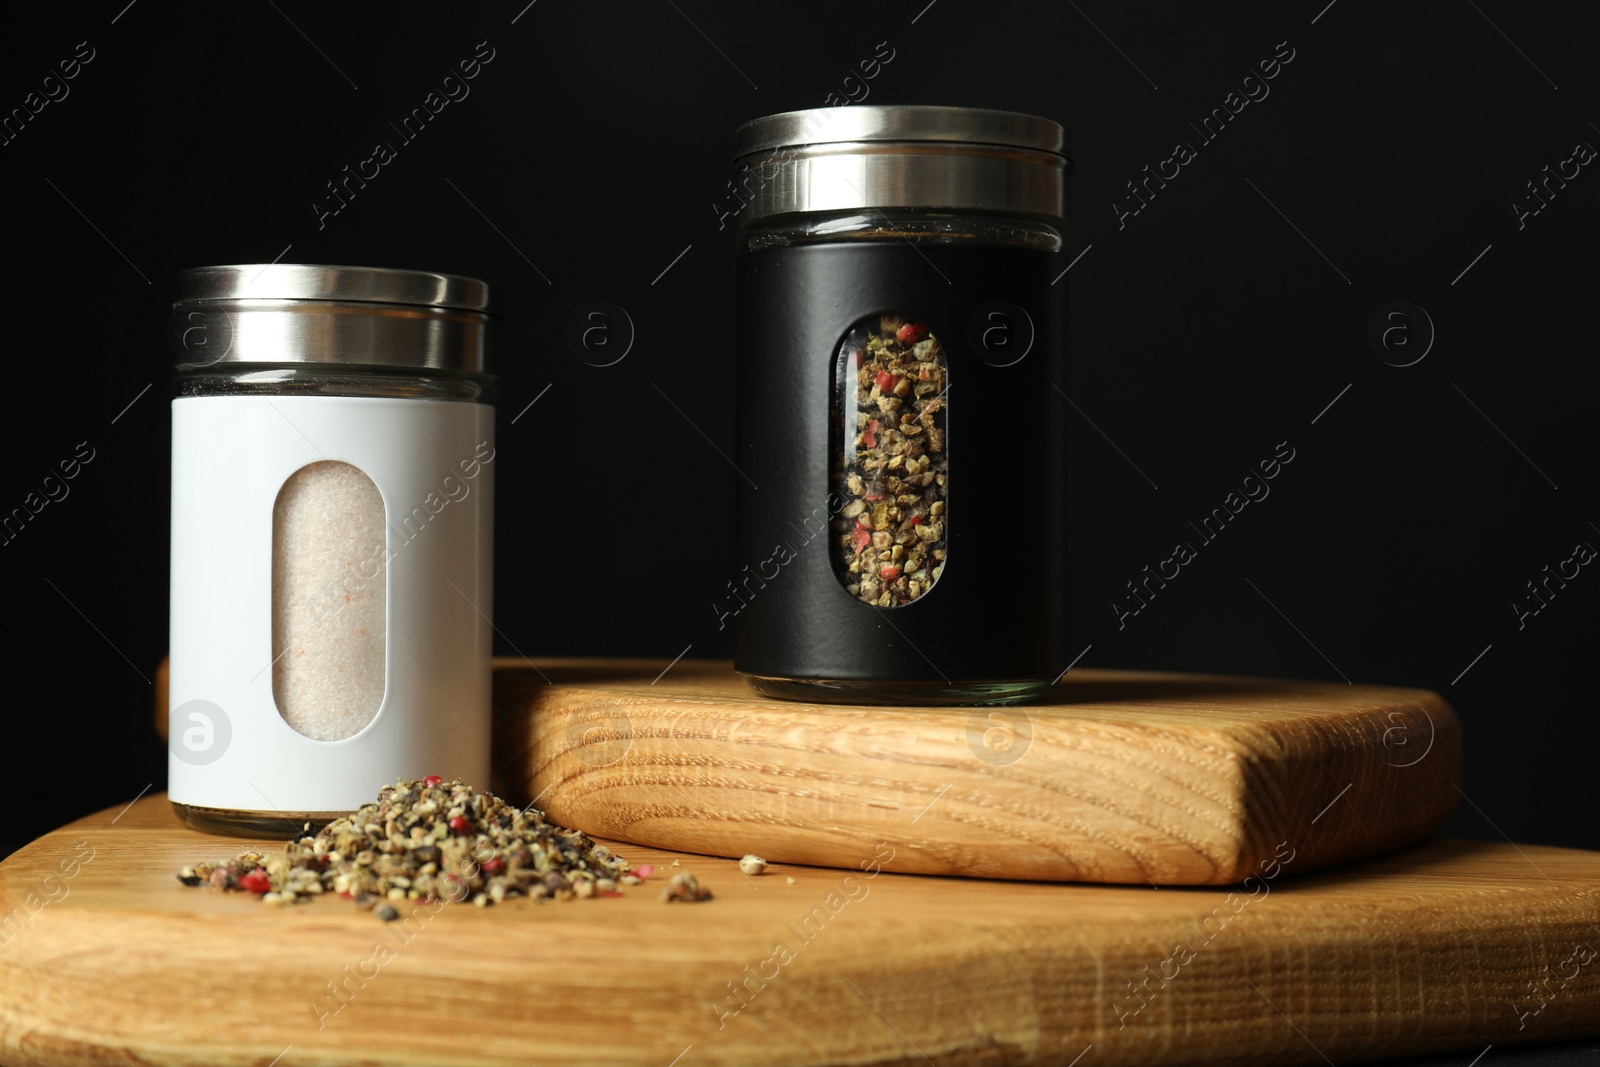 Photo of Salt and pepper shakers on wooden board against black background